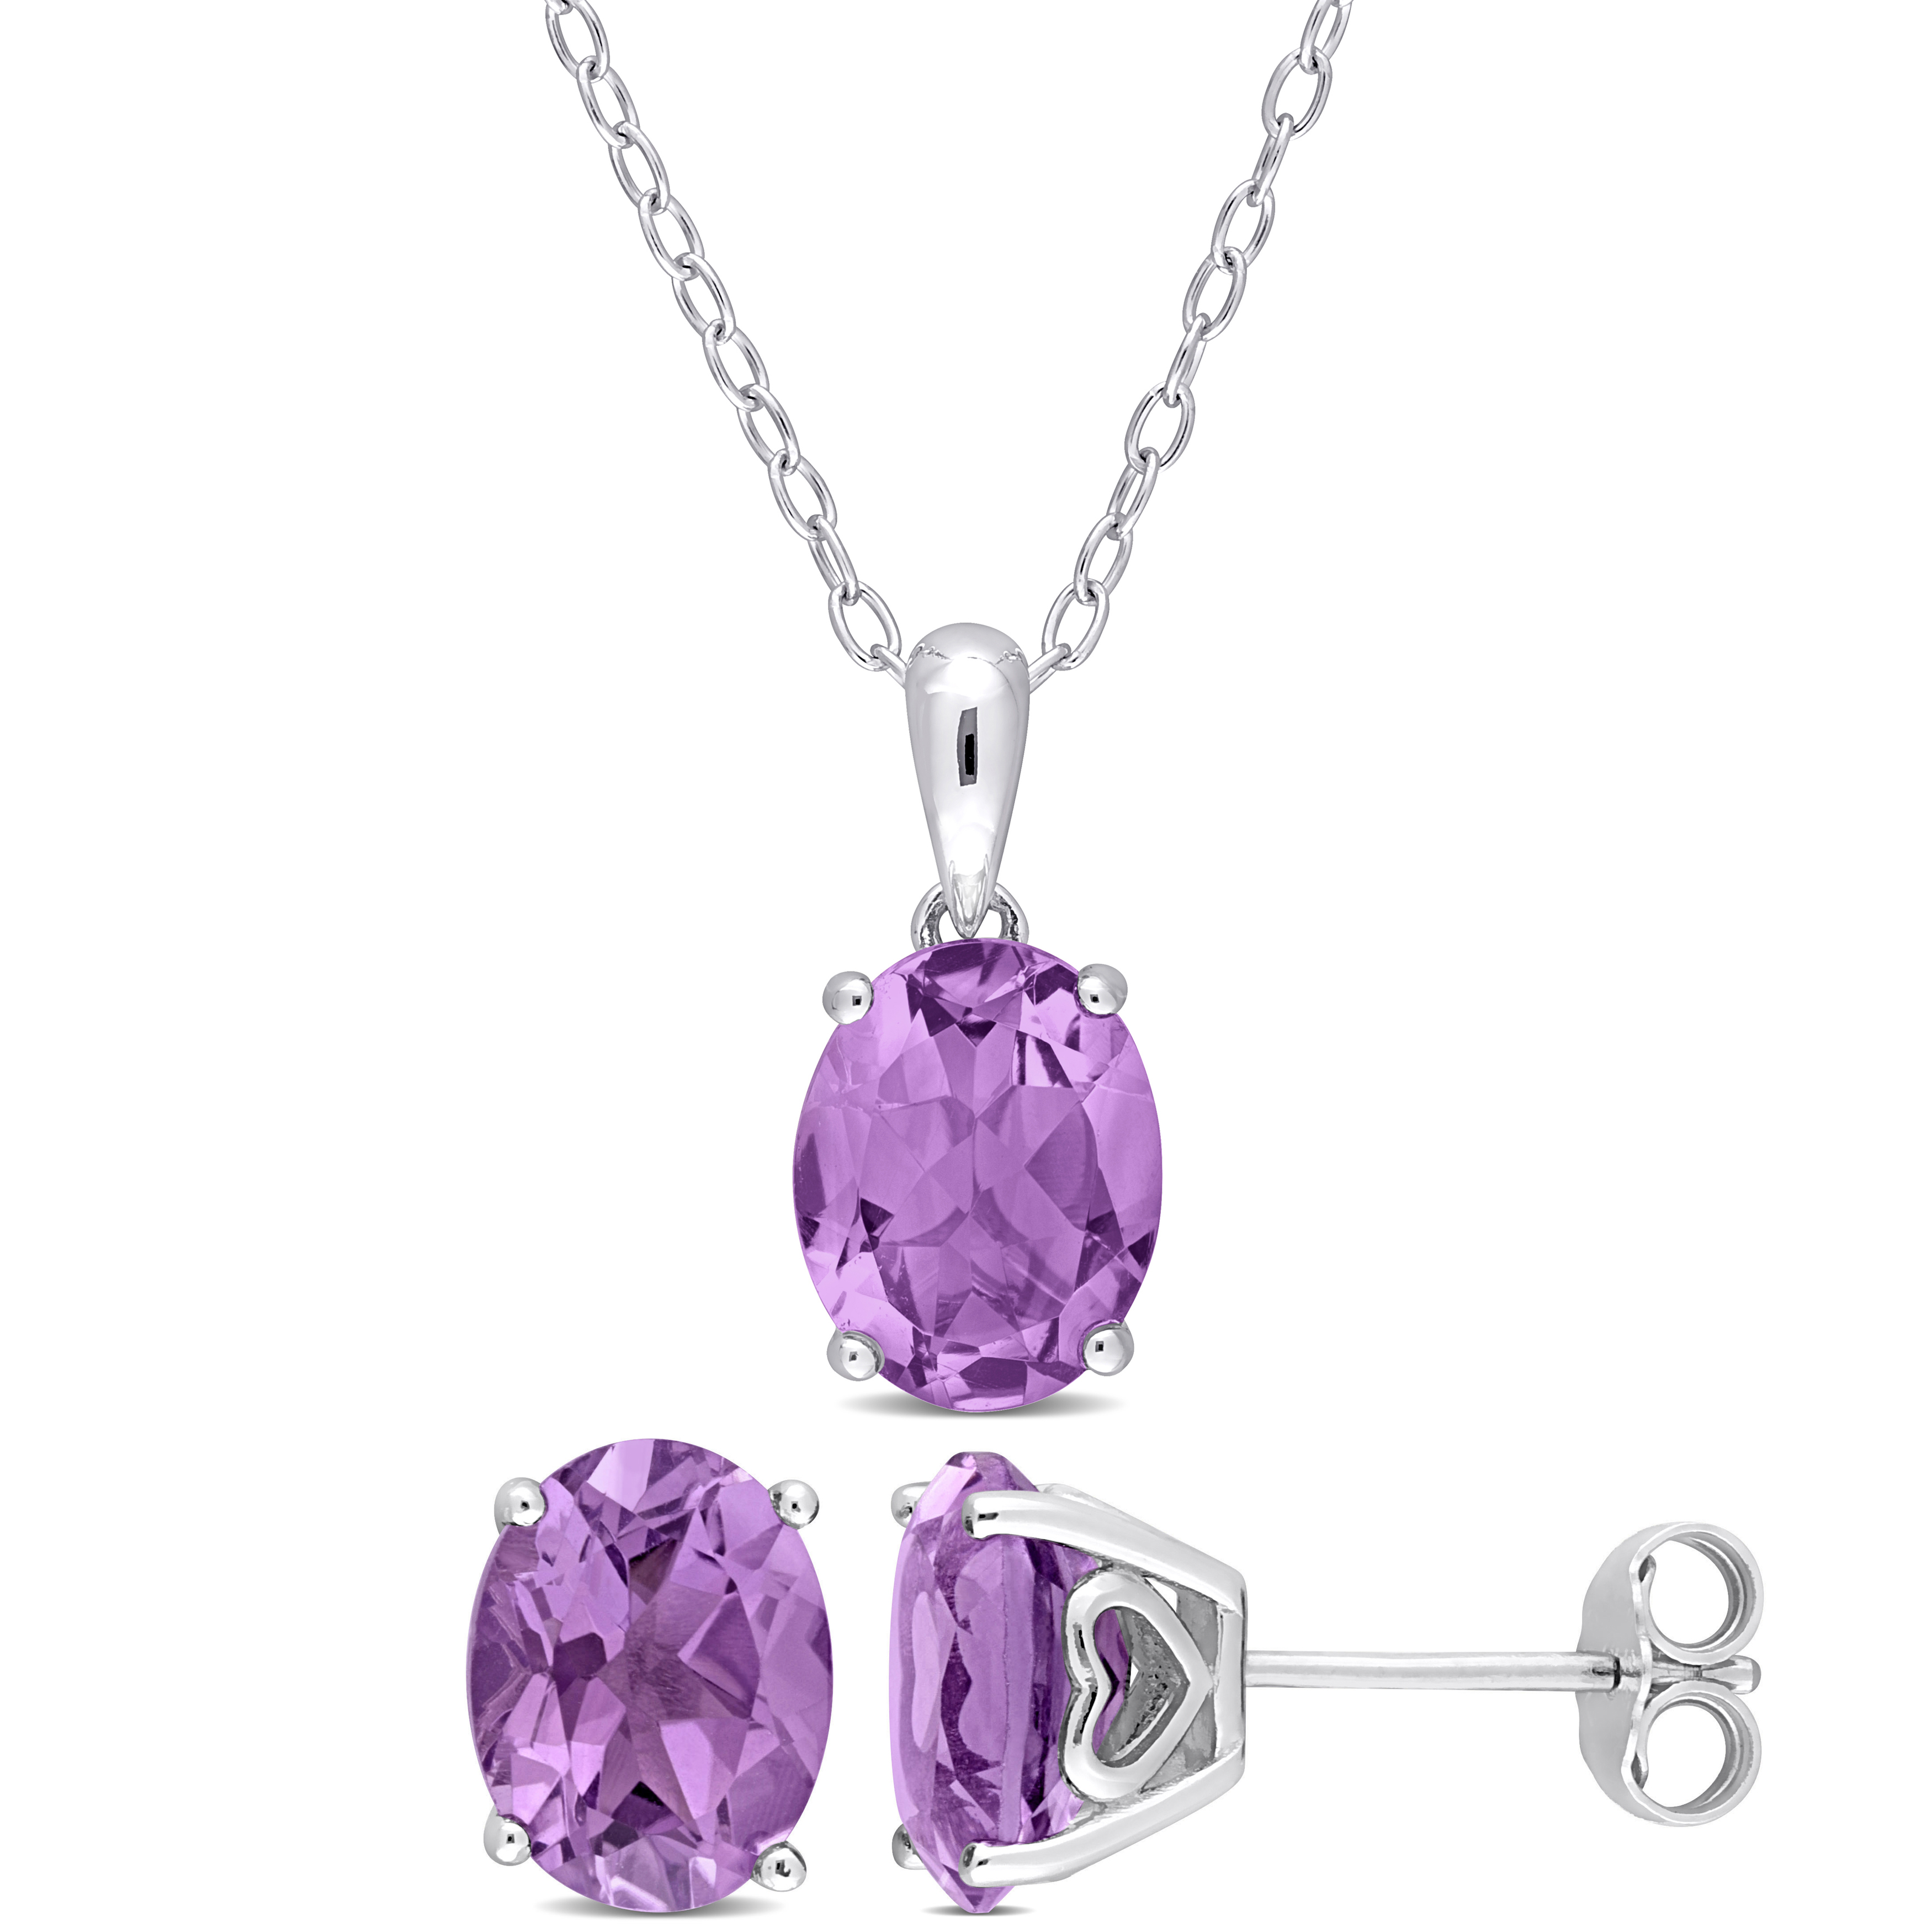 6 CT TGW Oval Amethyst 2-Piece Solitaire Pendant with Chain and Stud Earrings Set in Sterling Silver